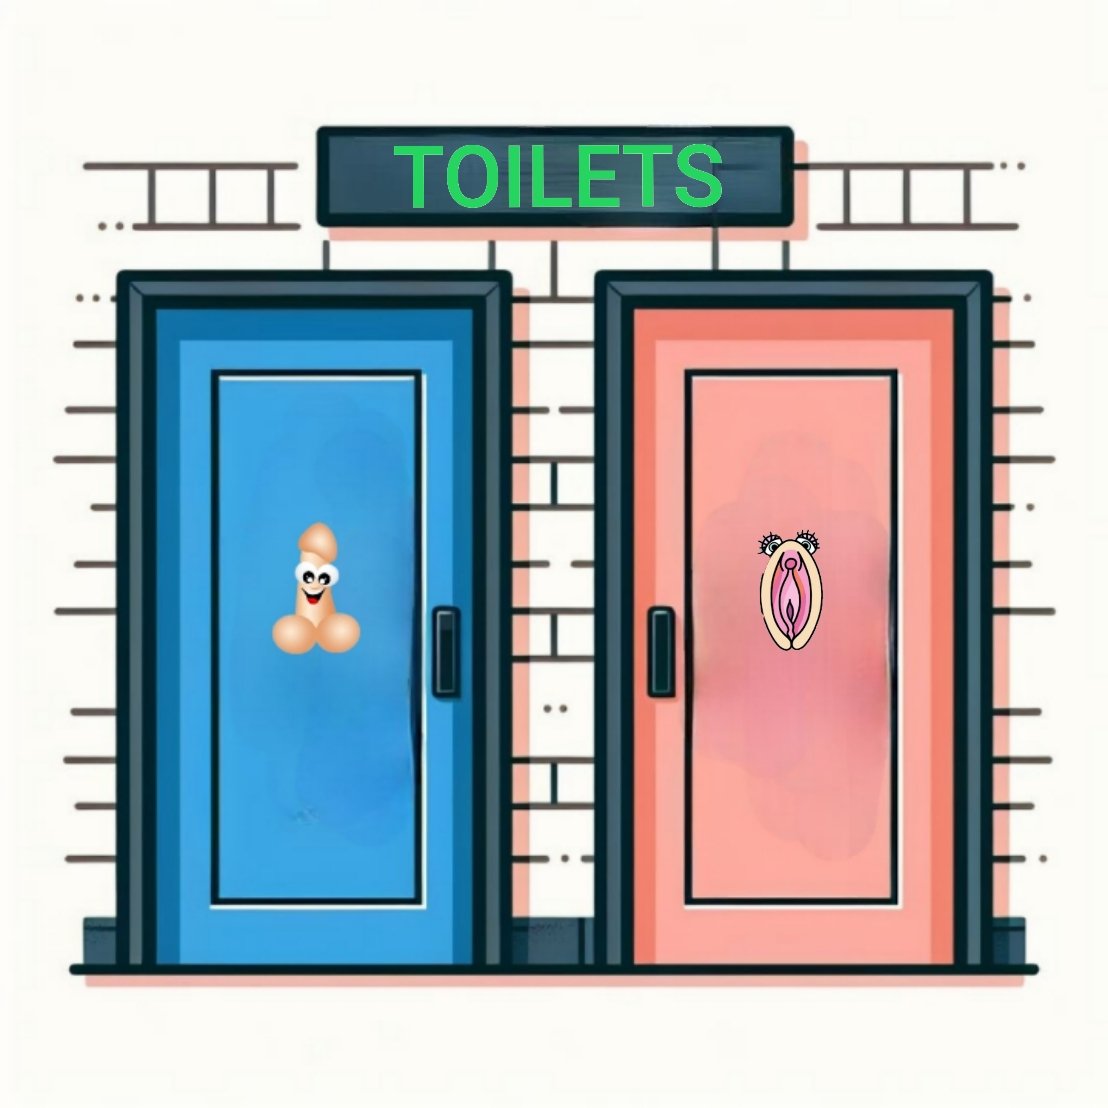 With all the confusion thesedays of which loos all the new fangled genders should be allowed to use, instead of male, female or unisex, how about this - One for people with dicks, & one for people with fannies!